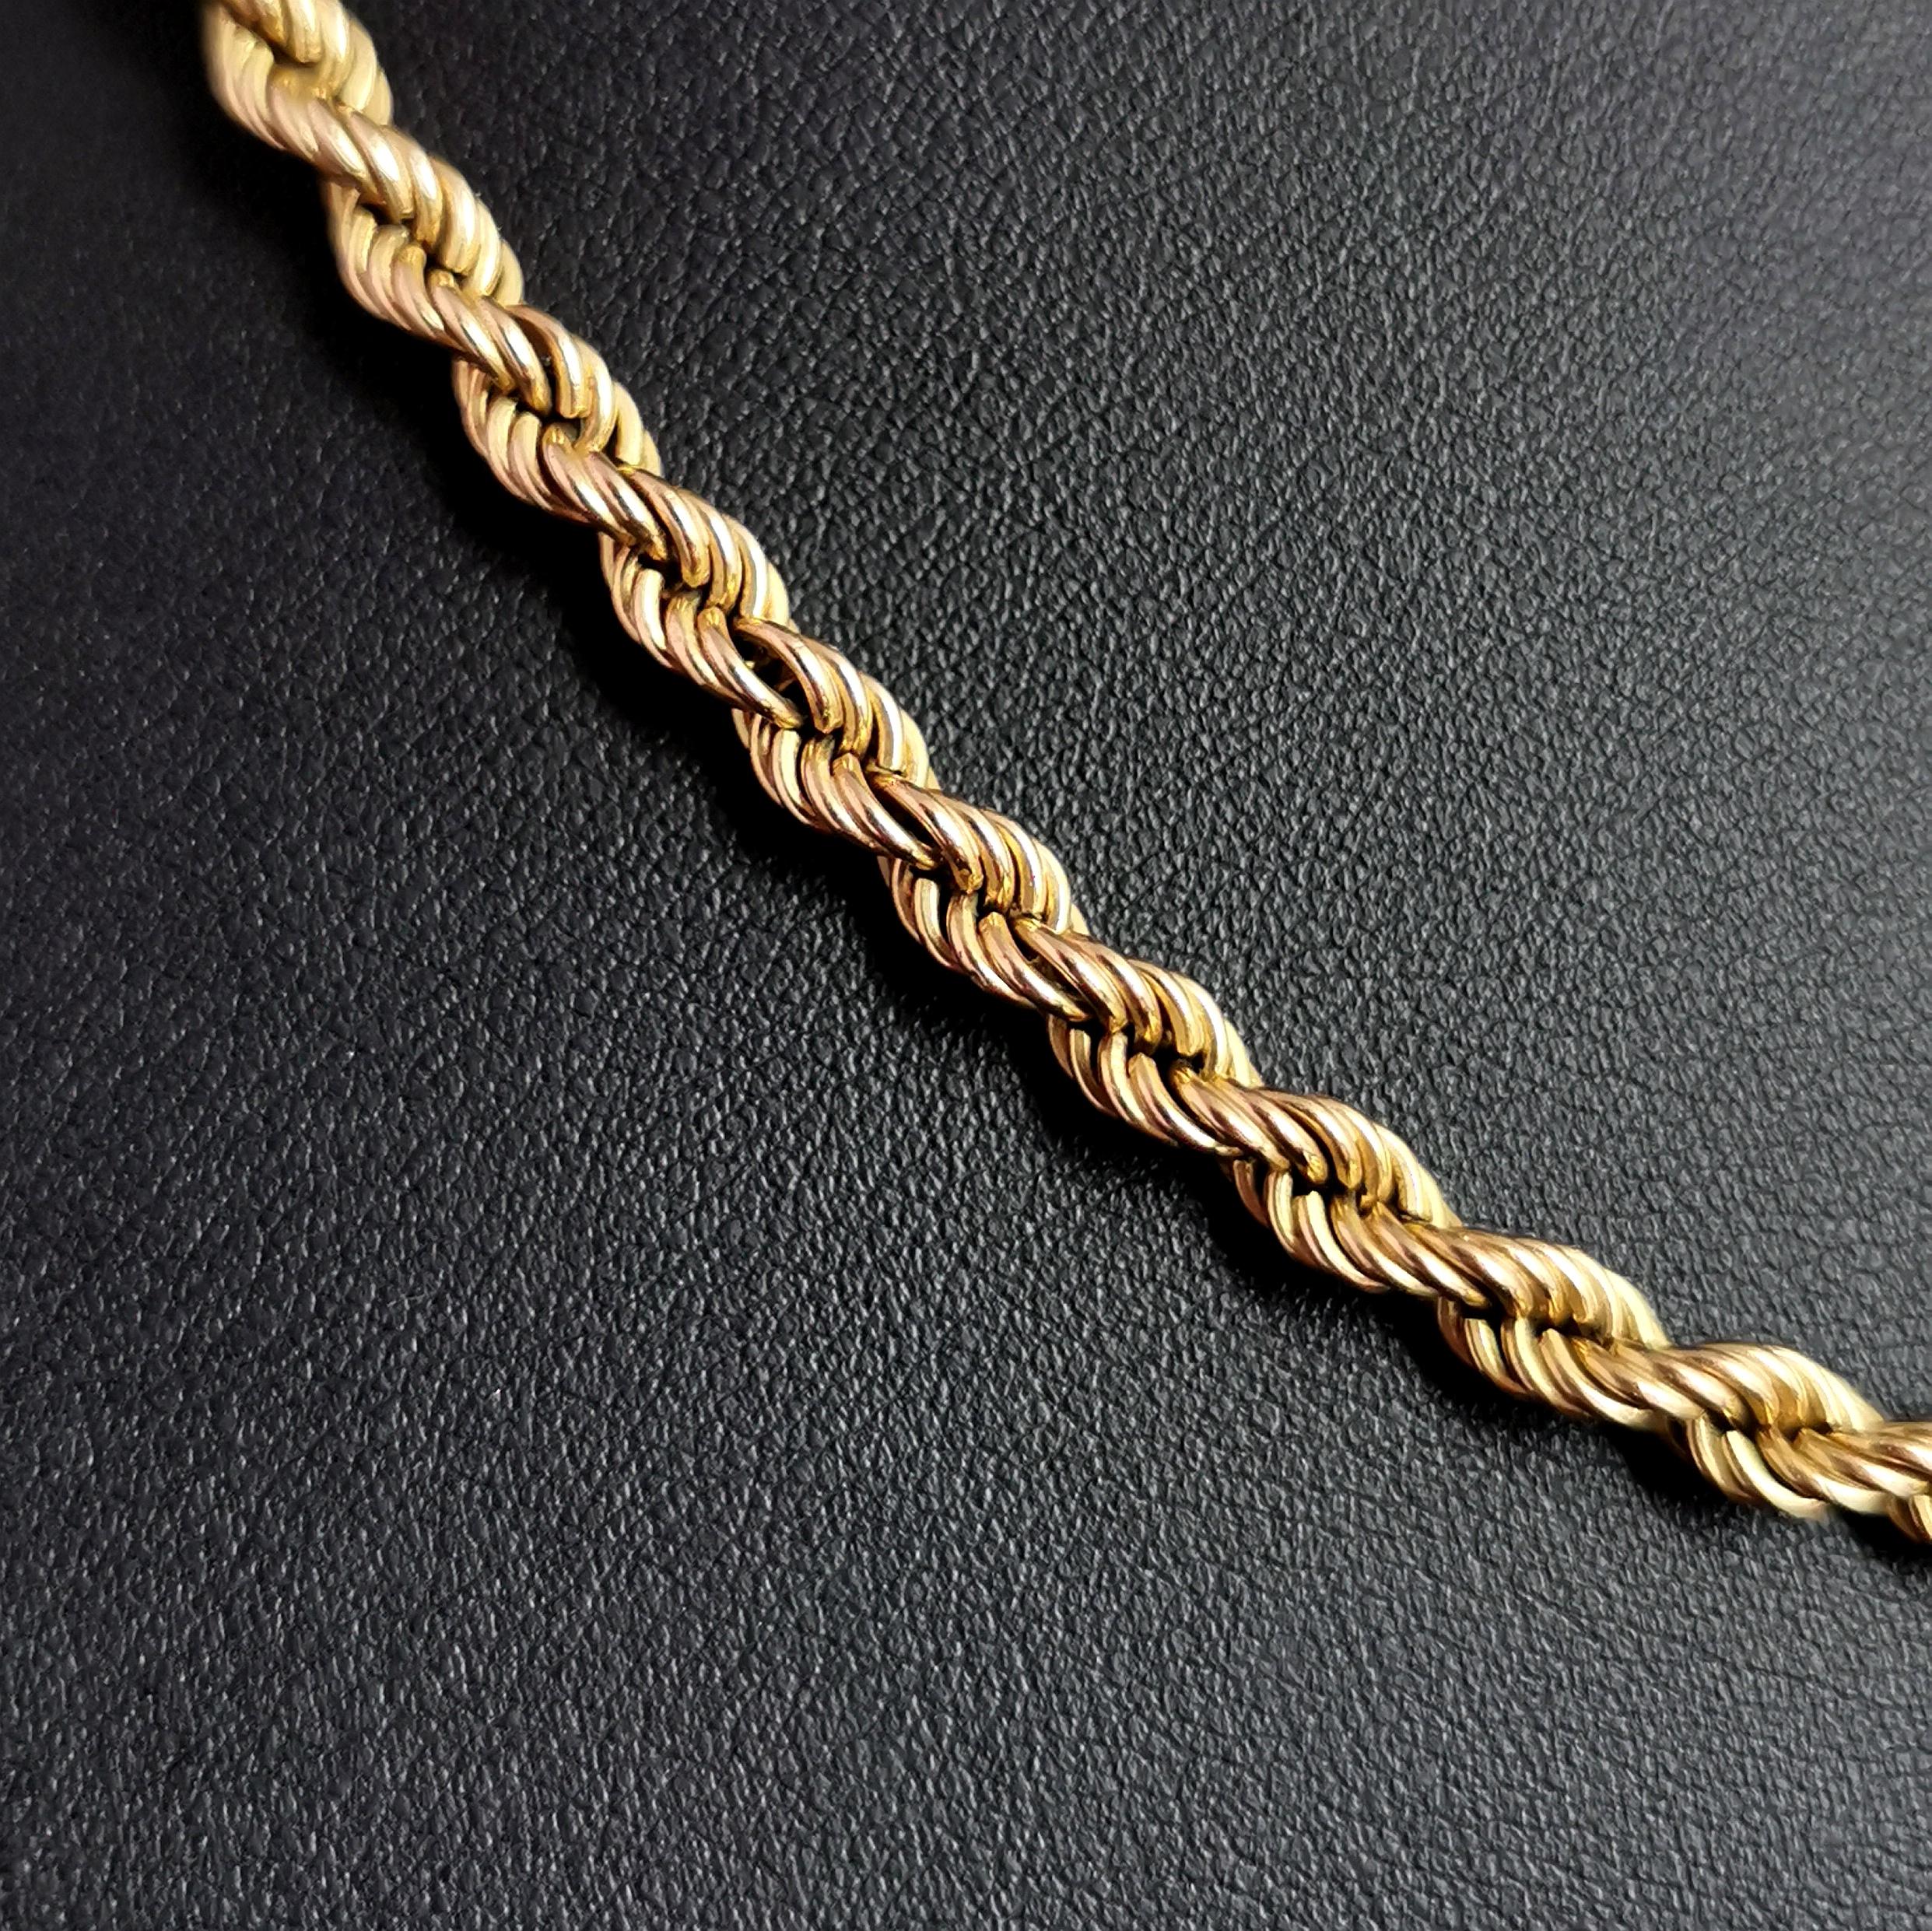 Vintage 9k Yellow Gold Rope Twist Chain Necklace, Italian 6